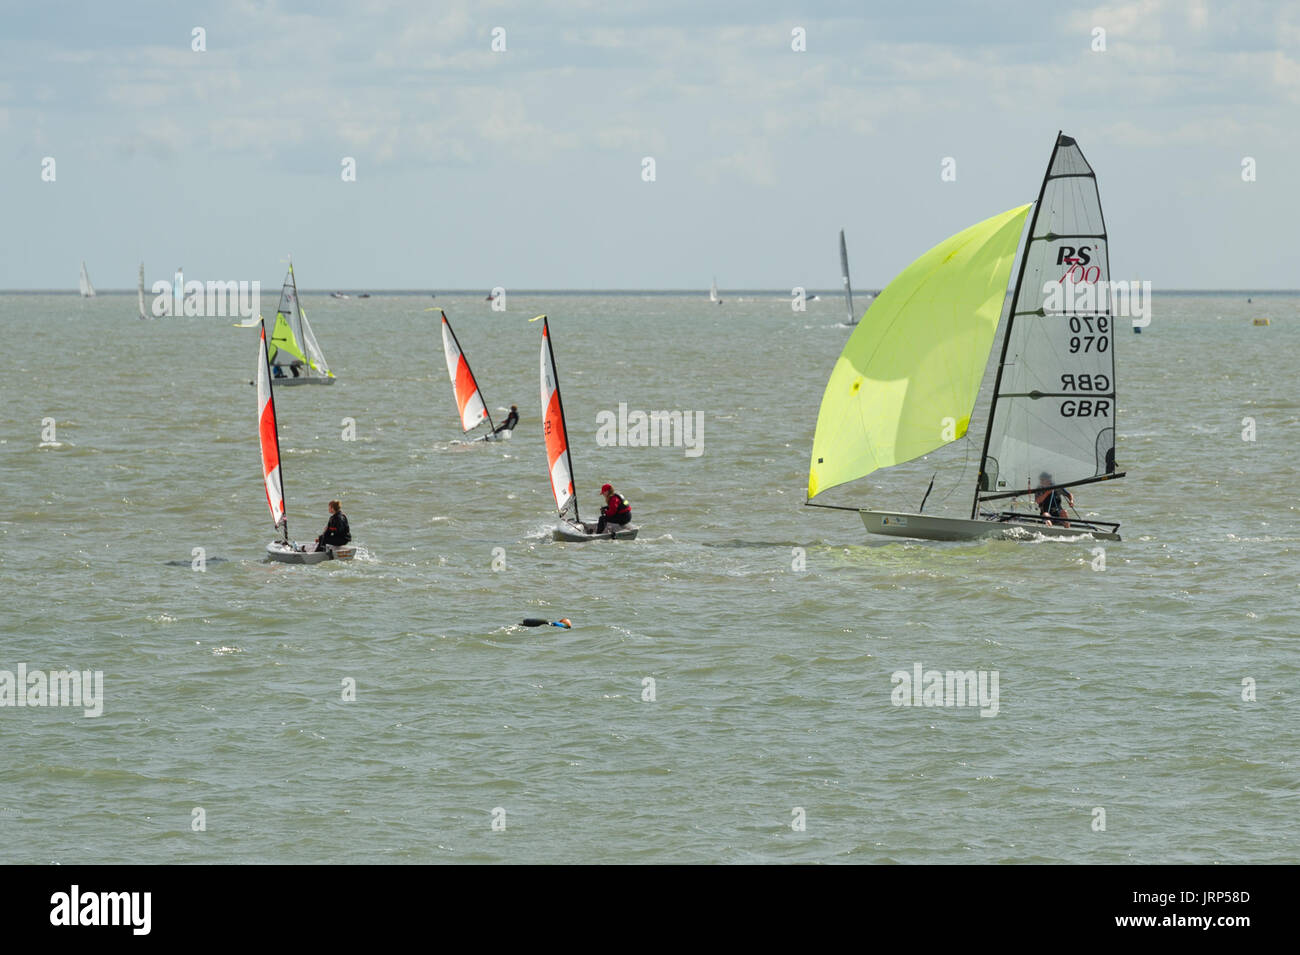 Brightlingsea, Essex, UK, 6 August 2017  Dinghy sailors competing in Pyefleet Week racing at Brightlingsea Sailing Club on the Colne Estuary in Essex. Pyefleet Week, whose main sponsor for a second year is  Learning & Skills Solutions, is one of the UK’s premier dinghy and day boat regattas and is the largest of its type on the East Coast, with up to 150 entries annually. Credit: Gary Eason/Alamy Live News Stock Photo